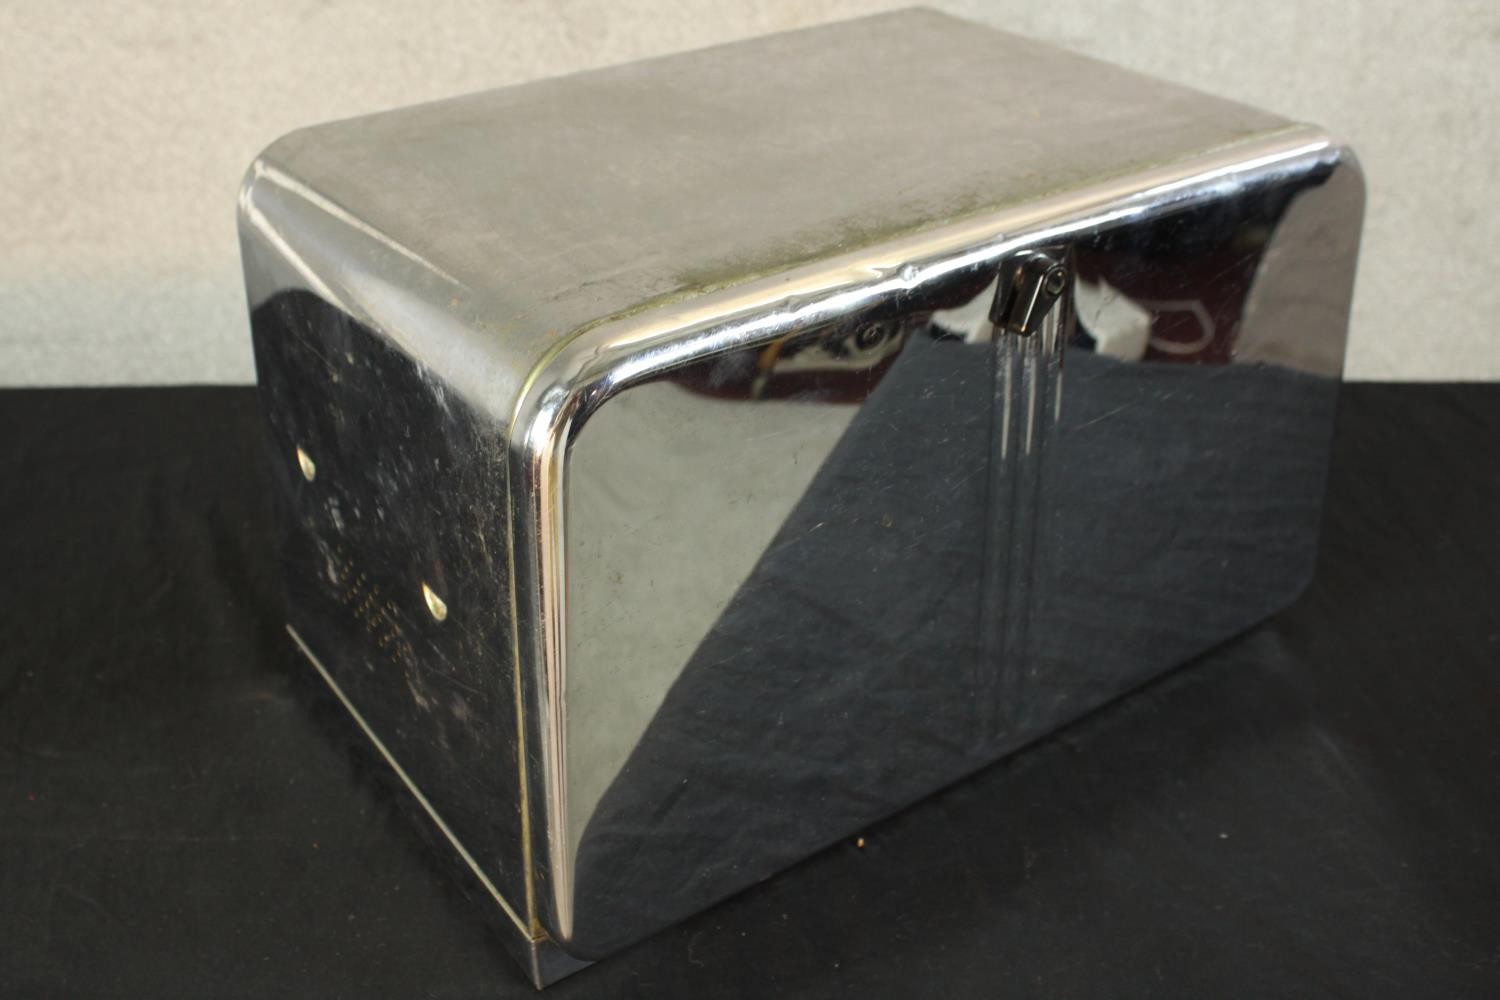 A mid 20th century chrome plated bread storage bin with internal shelf, vent holes and front - Image 5 of 5